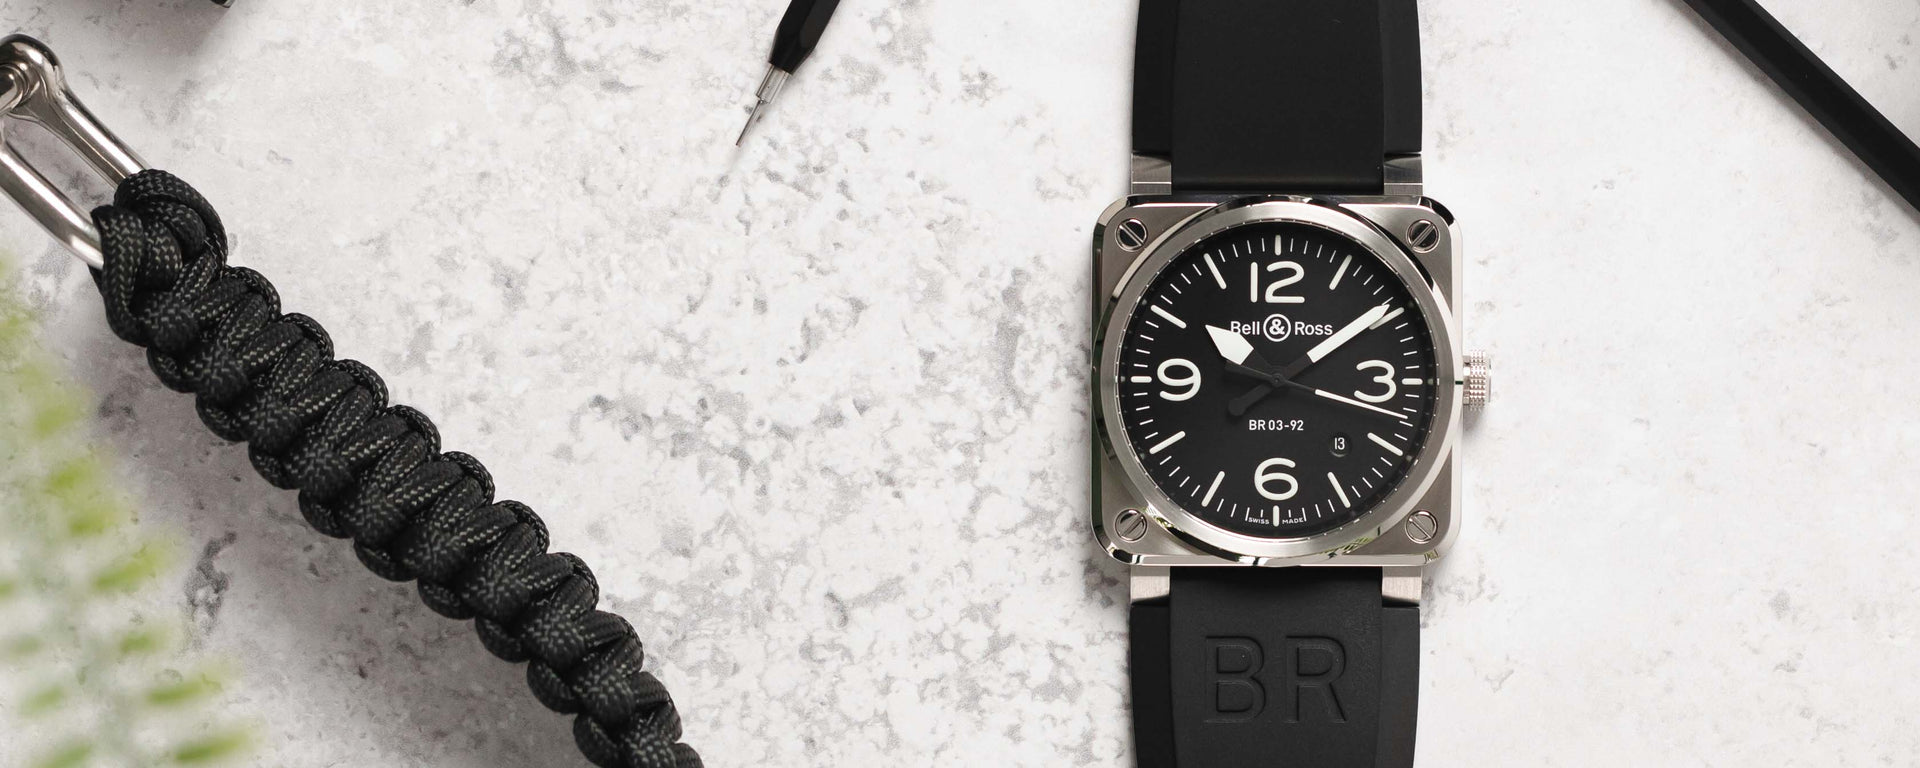 BELL & ROSS Pre-Owned Watches